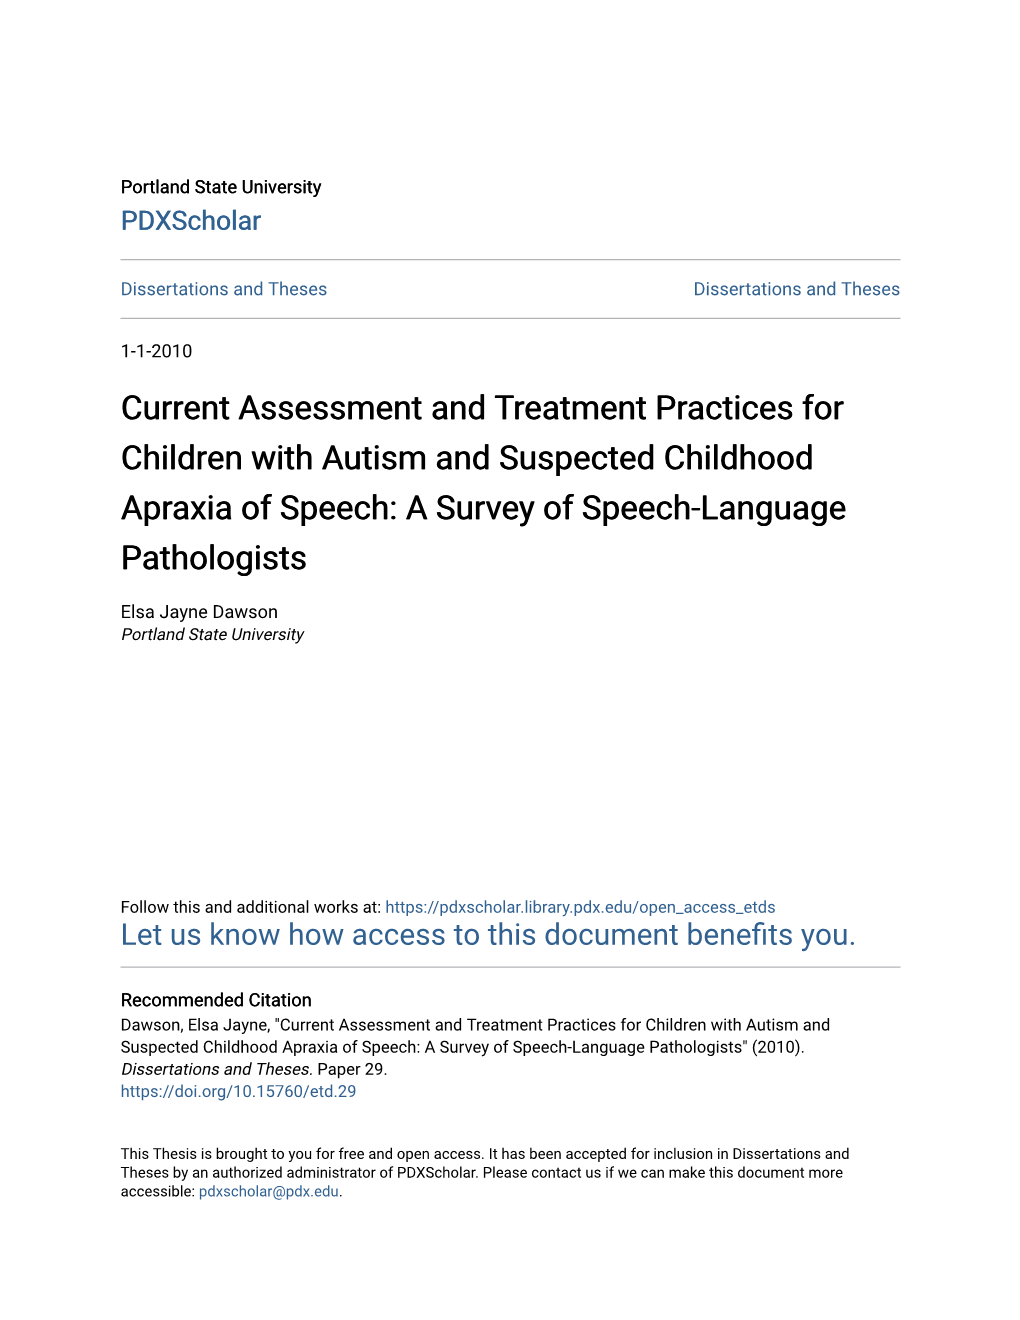 Current Assessment and Treatment Practices for Children with Autism and Suspected Childhood Apraxia of Speech: a Survey of Speech-Language Pathologists